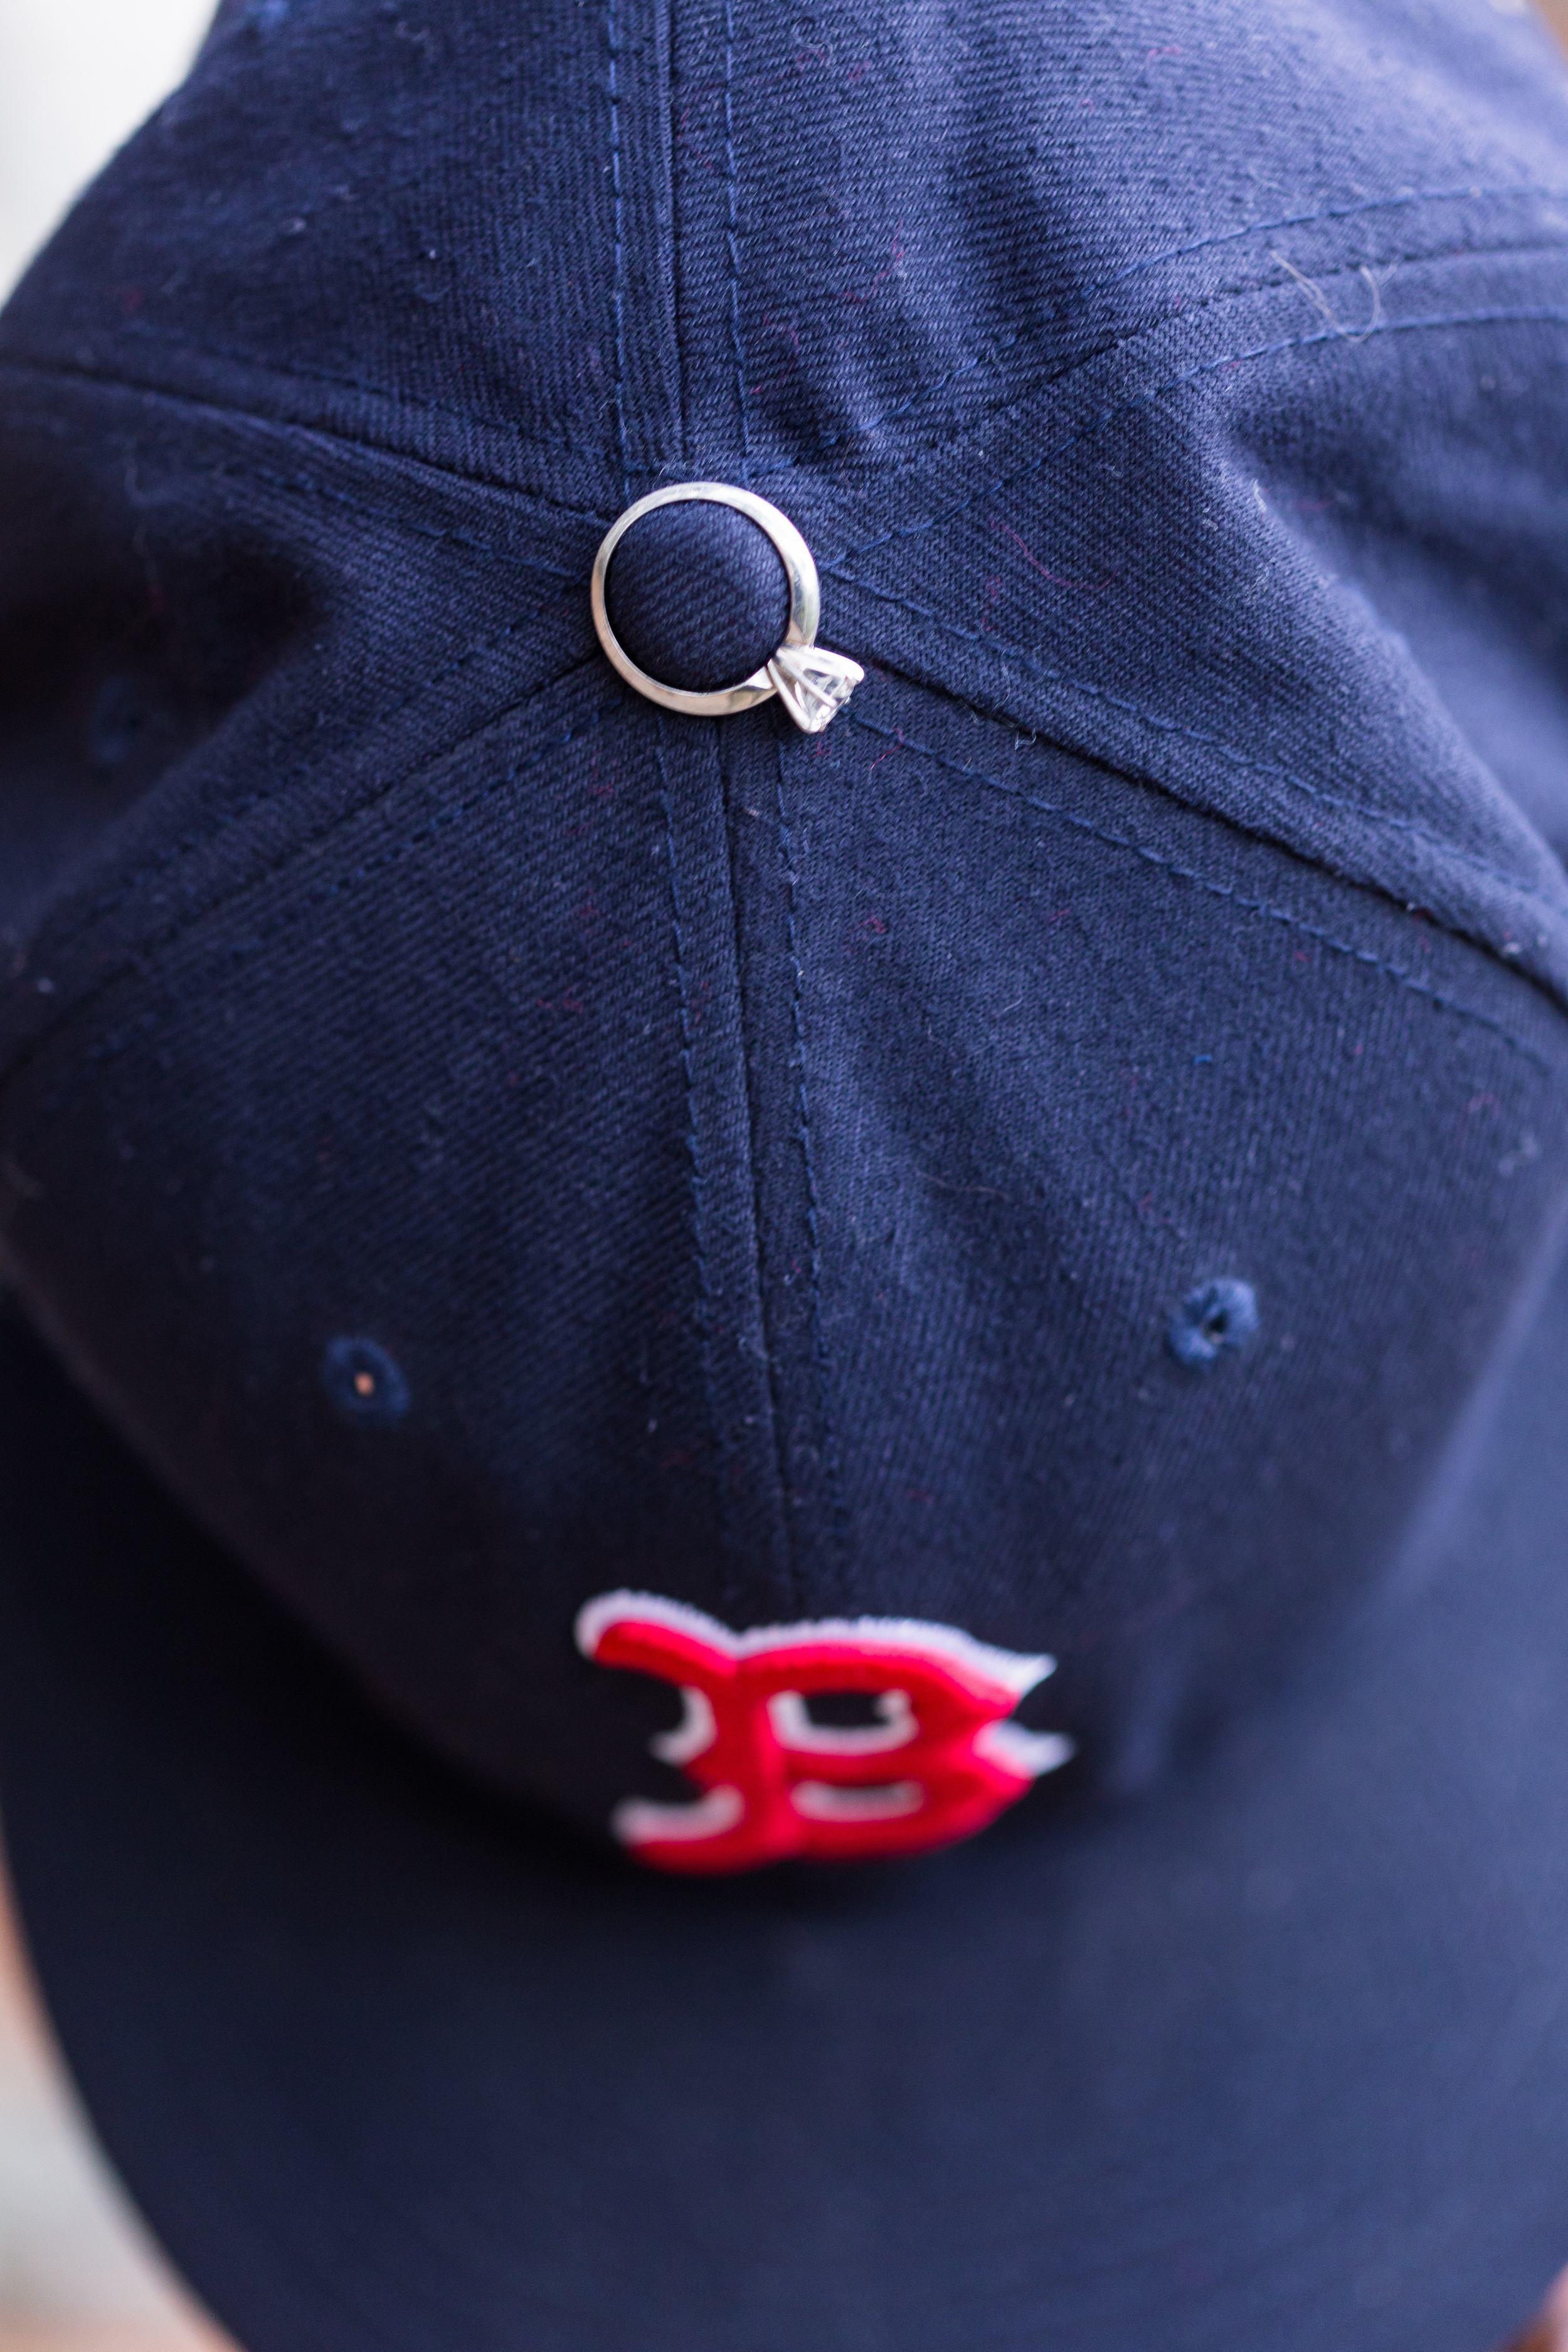 engagement ring on boston red sox baseball hat at middlesex fells